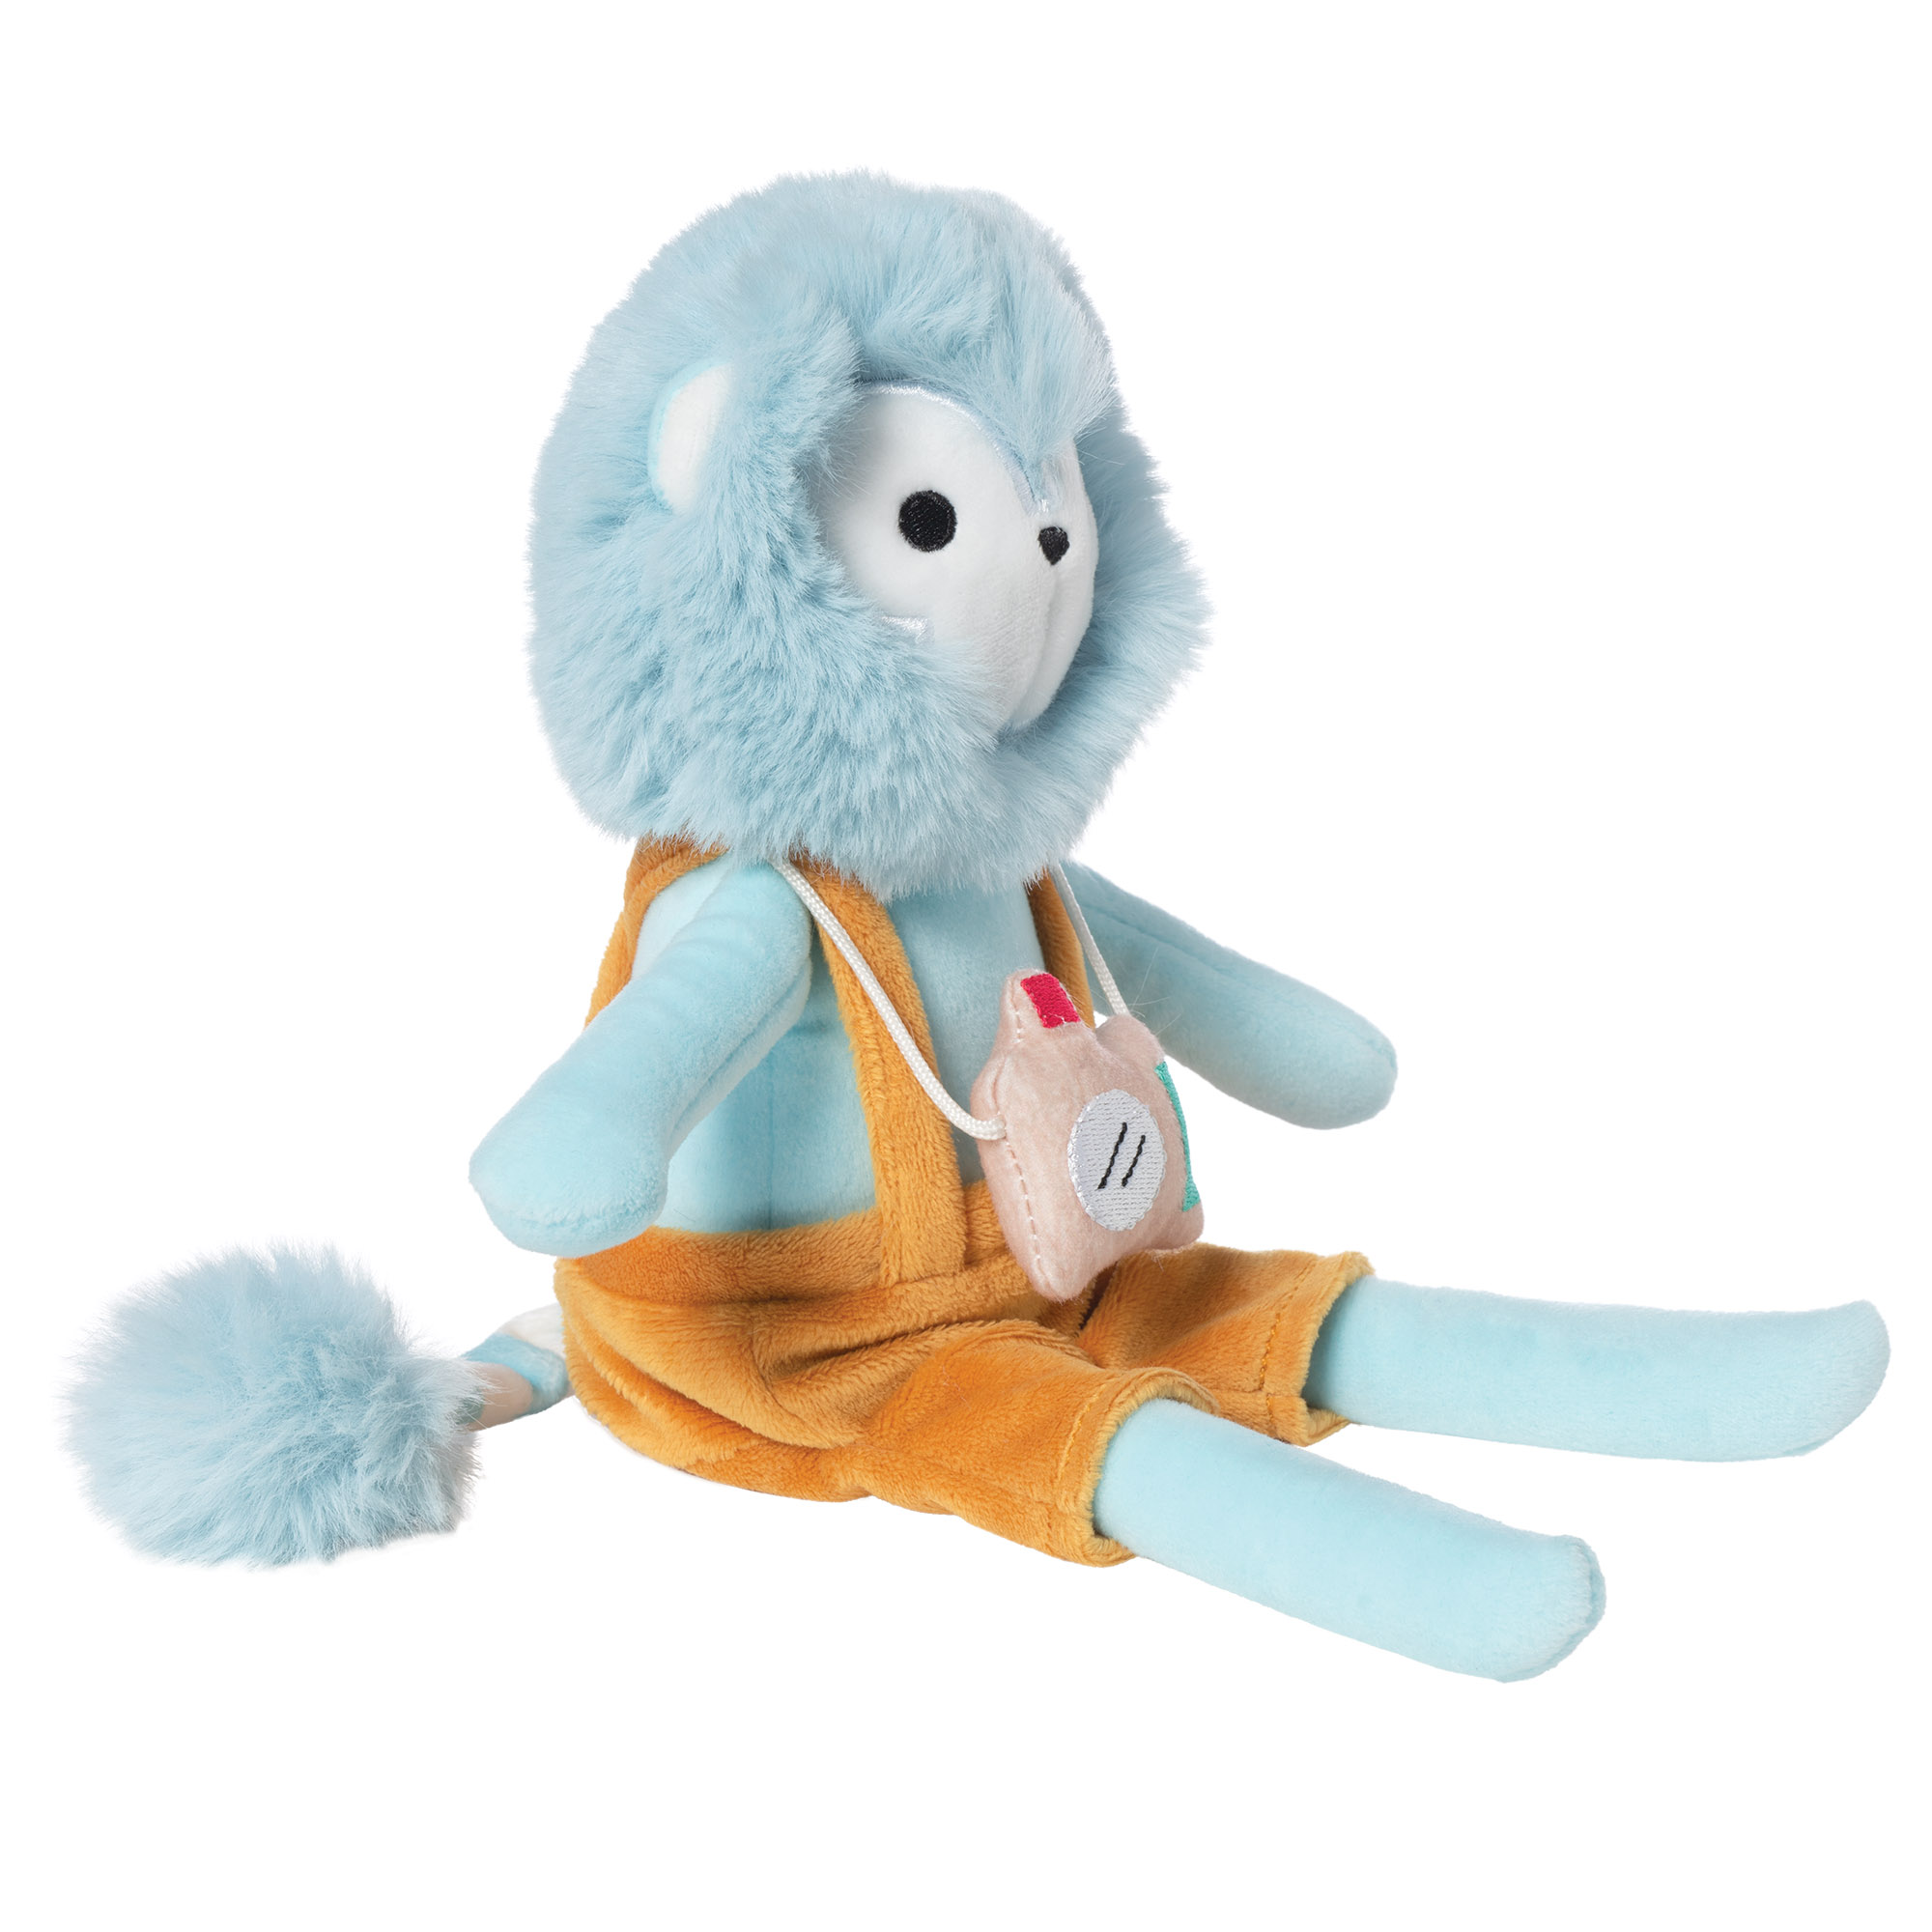 Manhattan Toy Natural Historian Stuffed Animal Lemur with Sewn on Camera and Clothes 13" Tall Plush Toy - image 5 of 7